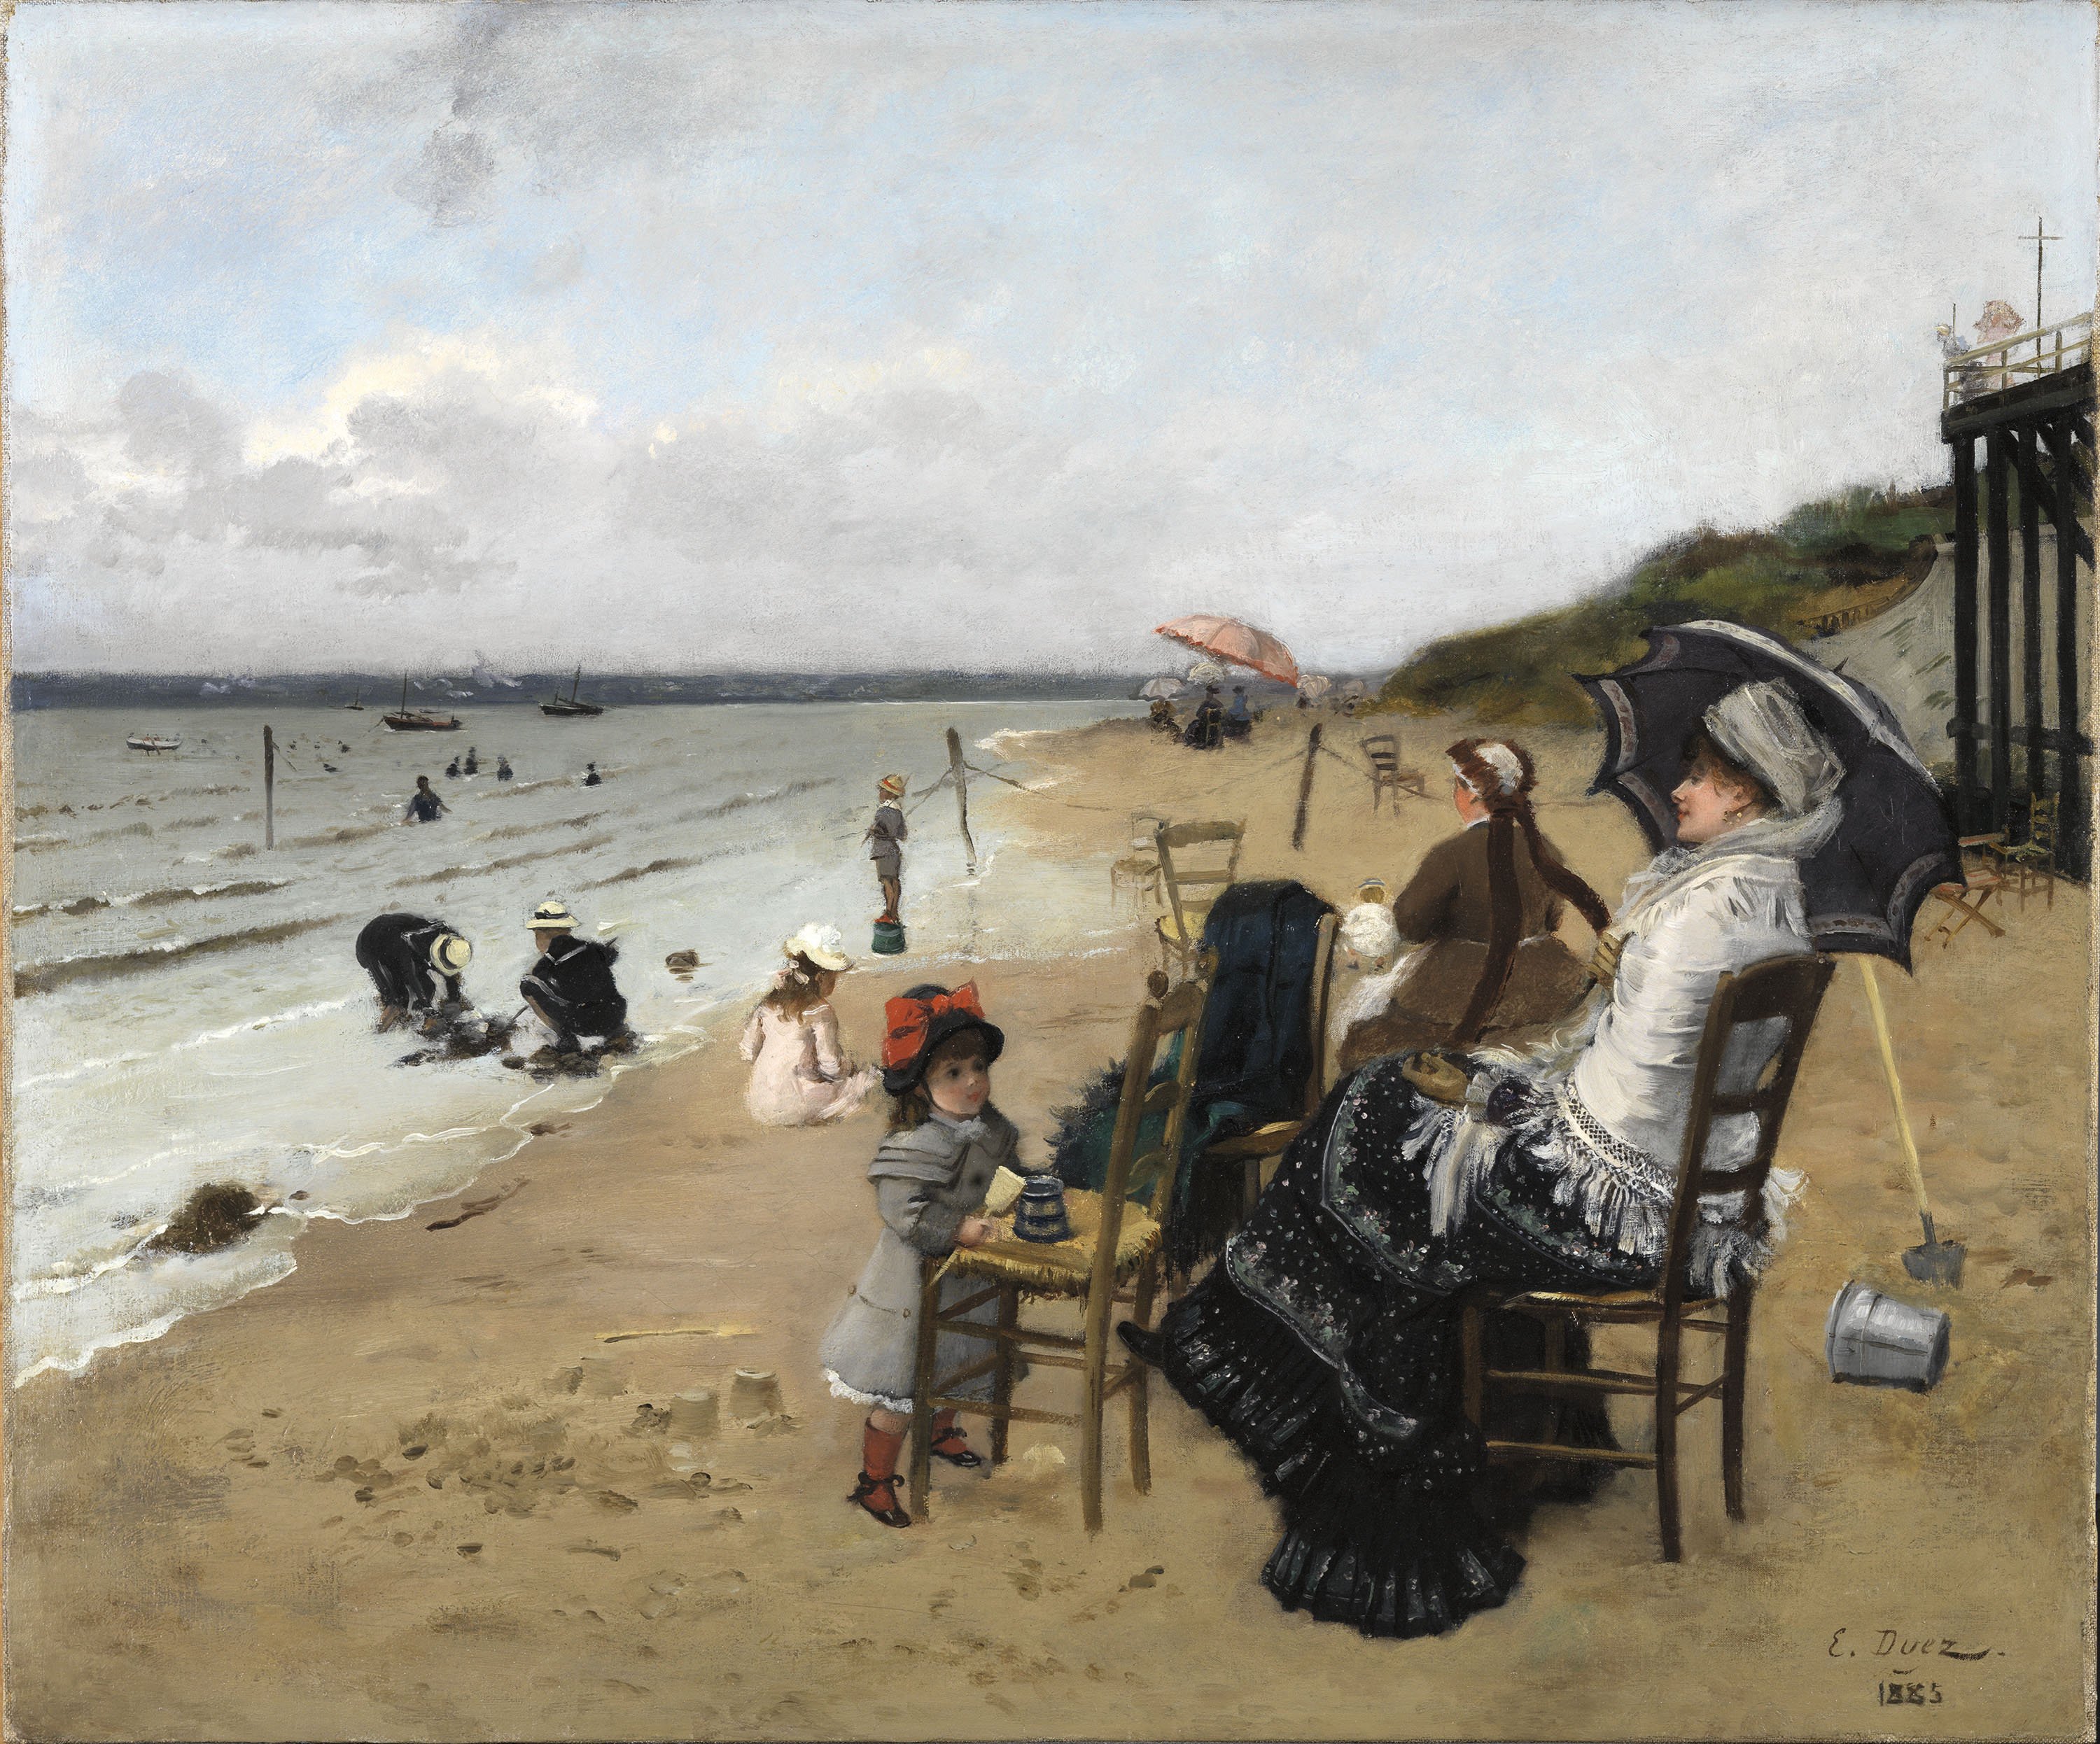 Mother and Daughter on the Beach. Madre e hija en la playa, 1885